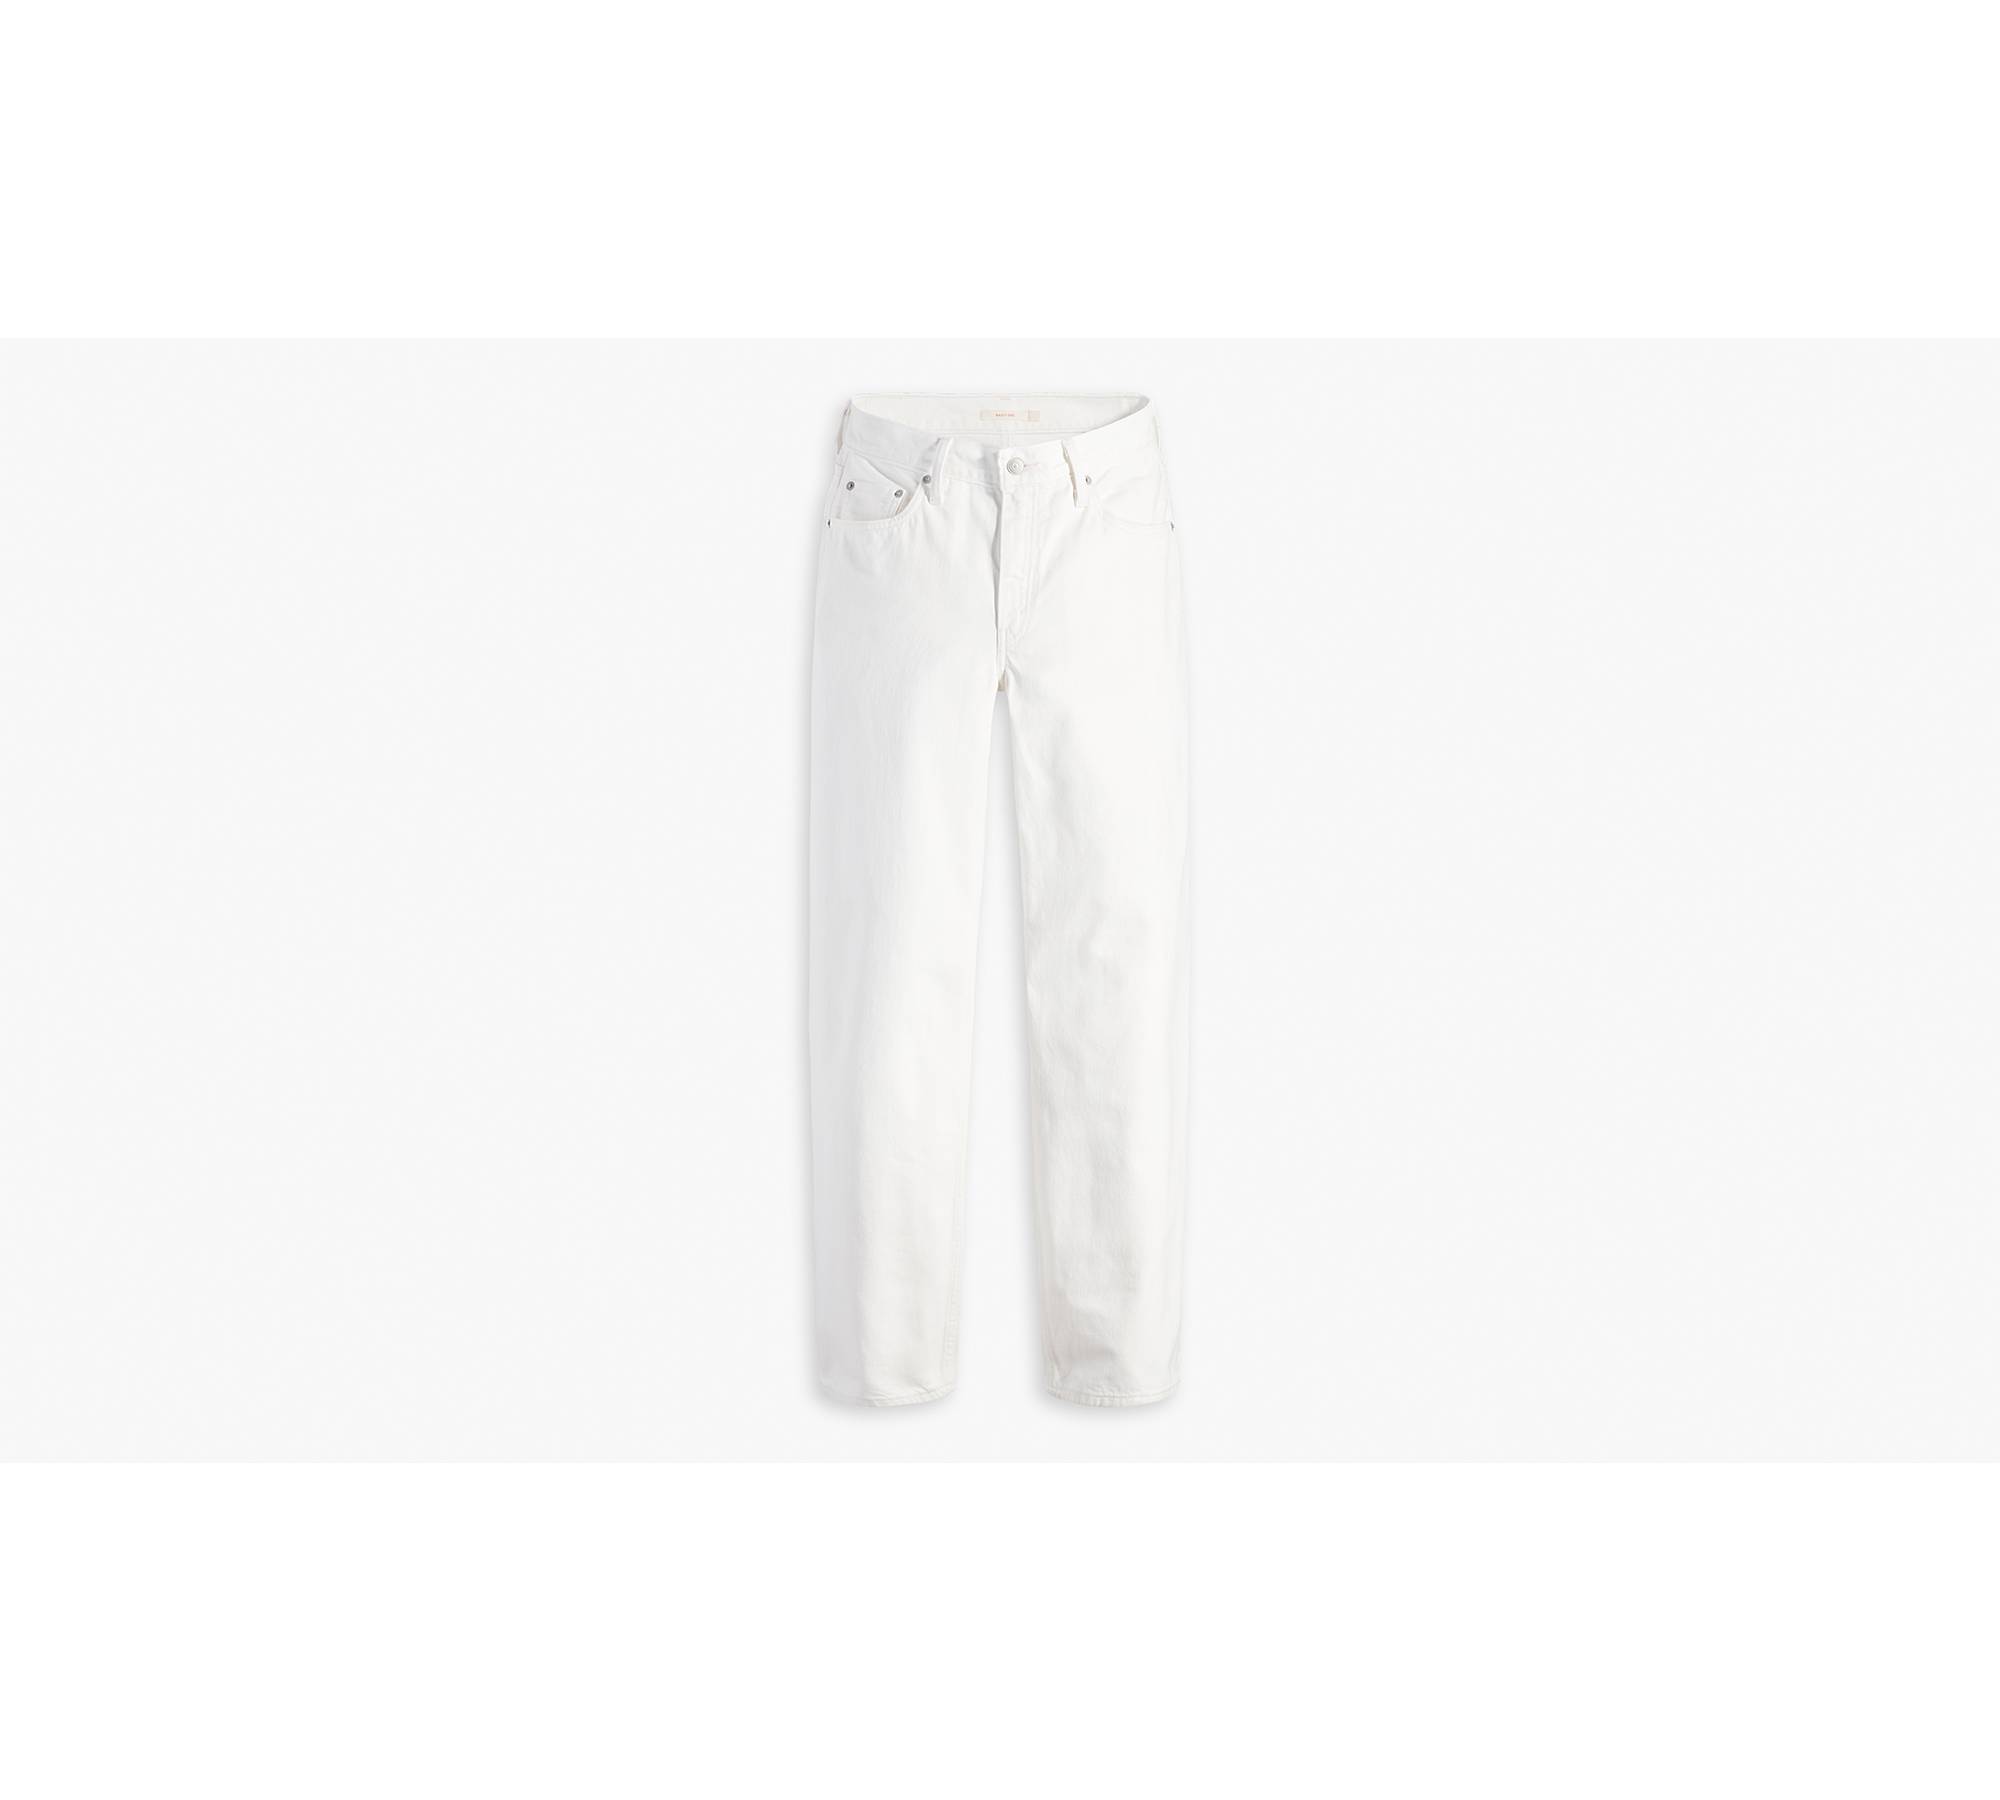 Wellthread® Baggy Dad Jeans - White | Levi's® DK